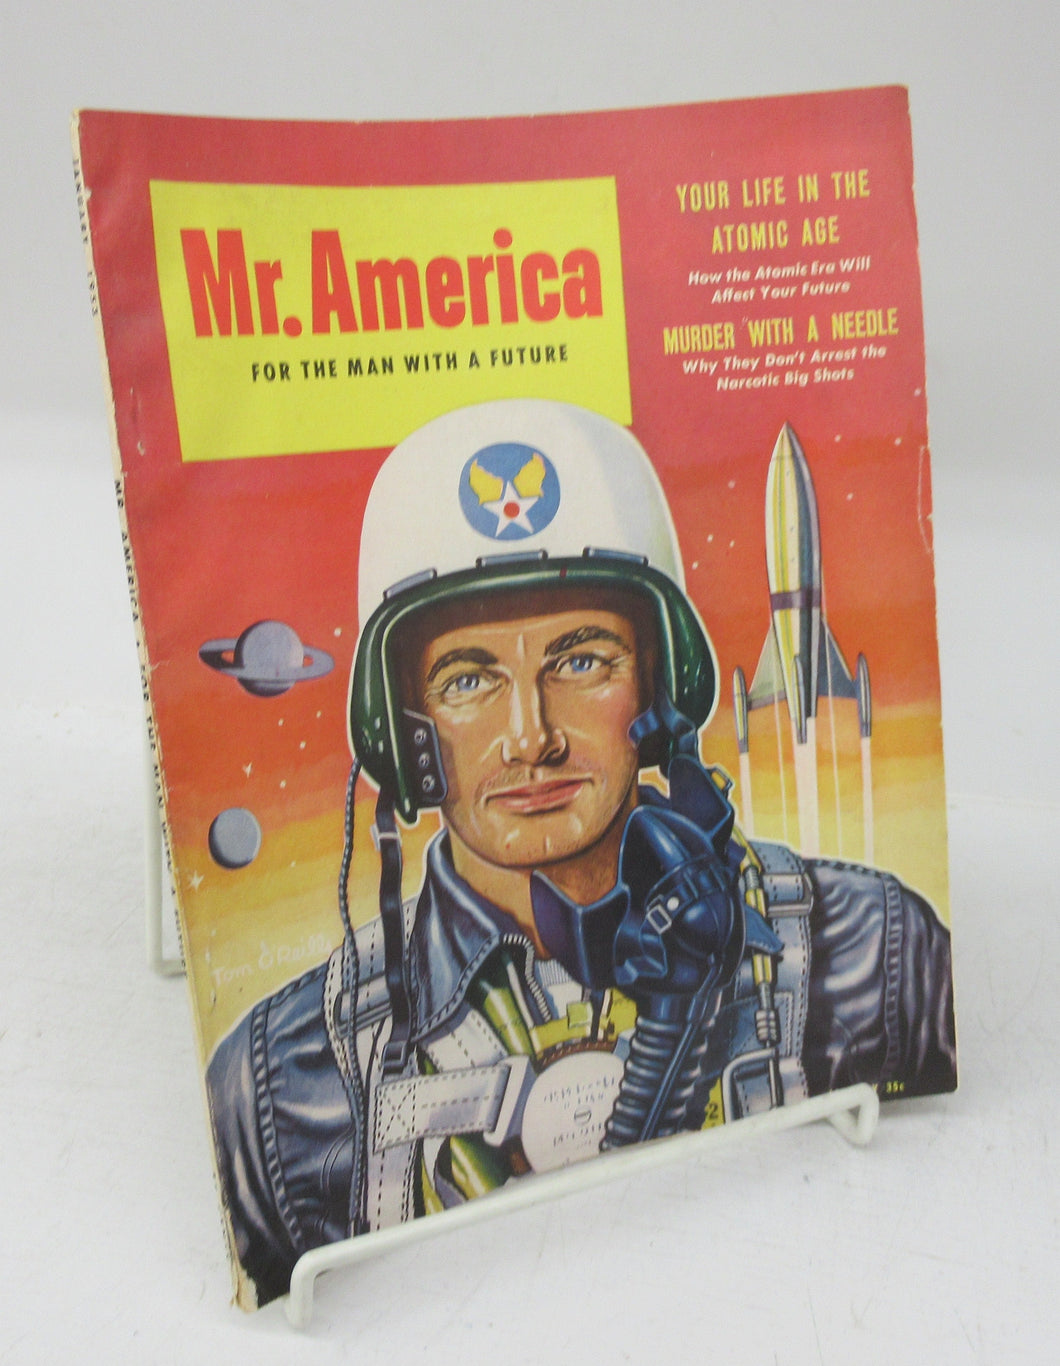 Mr. America "For the Man with a Future" January 1953